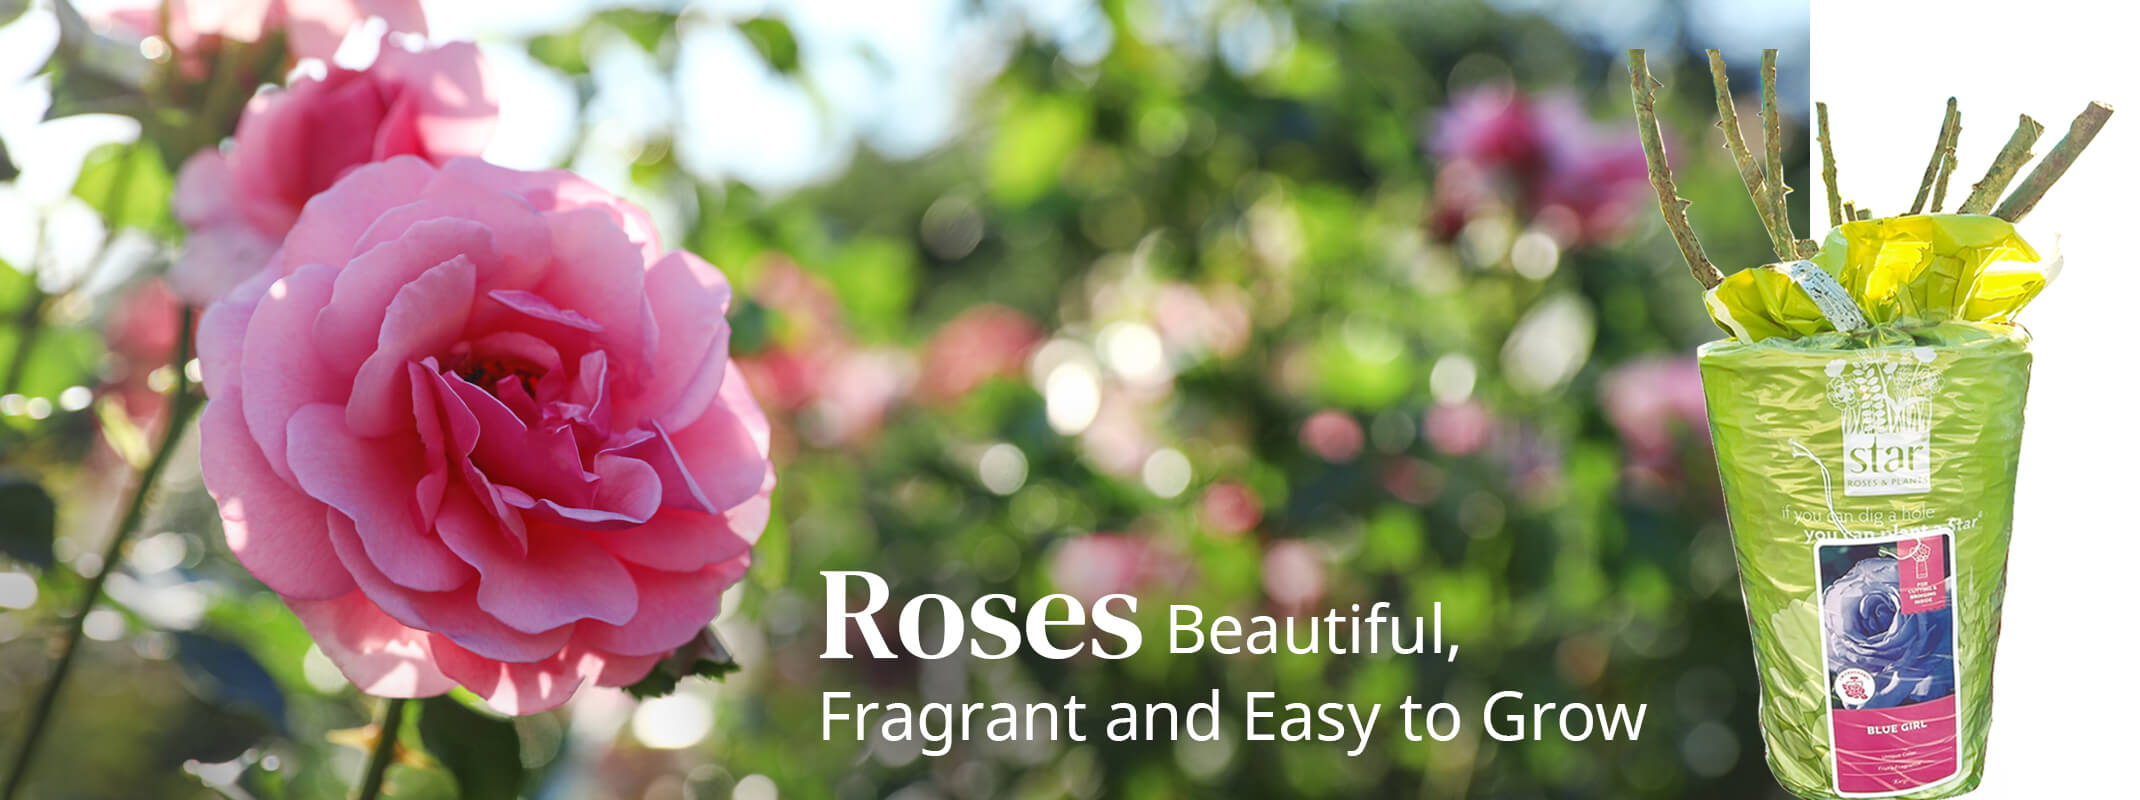 pink roses with the words roses beautiful, fragrant and easy to grow and a package of star bareroot roses 